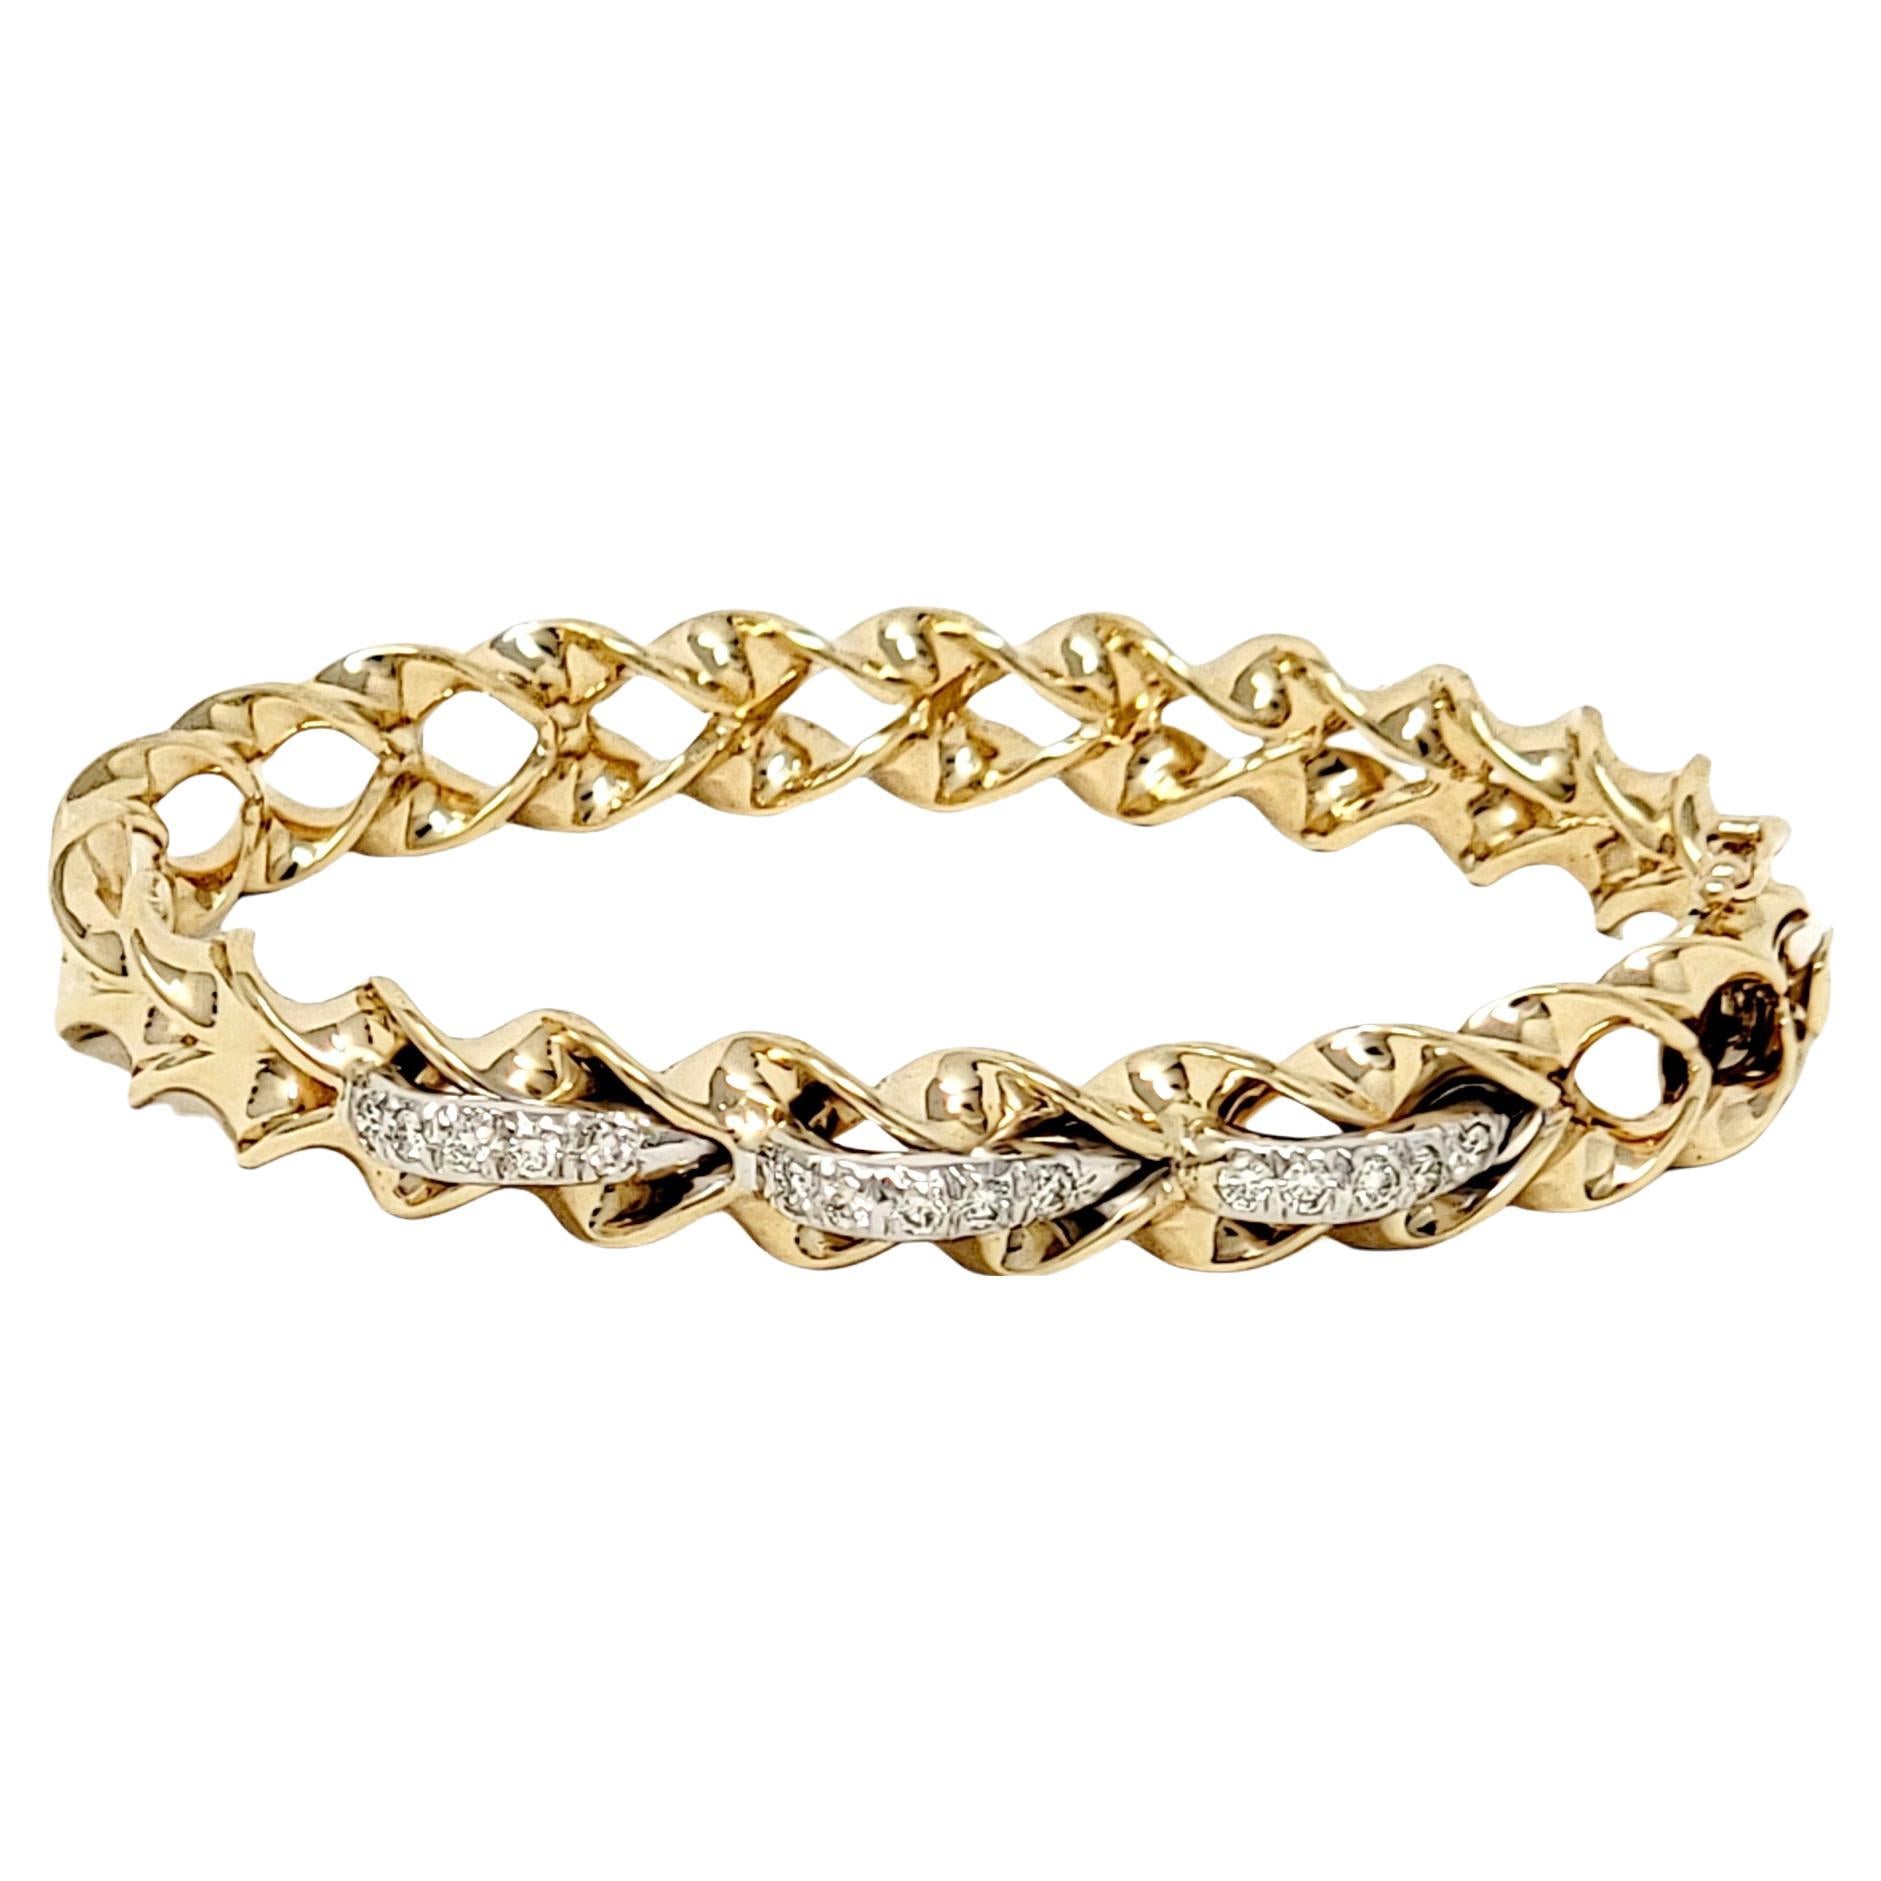 .50 Carat Total Round Diamond Twisted Hinged Bangle Bracelet in Yellow Gold